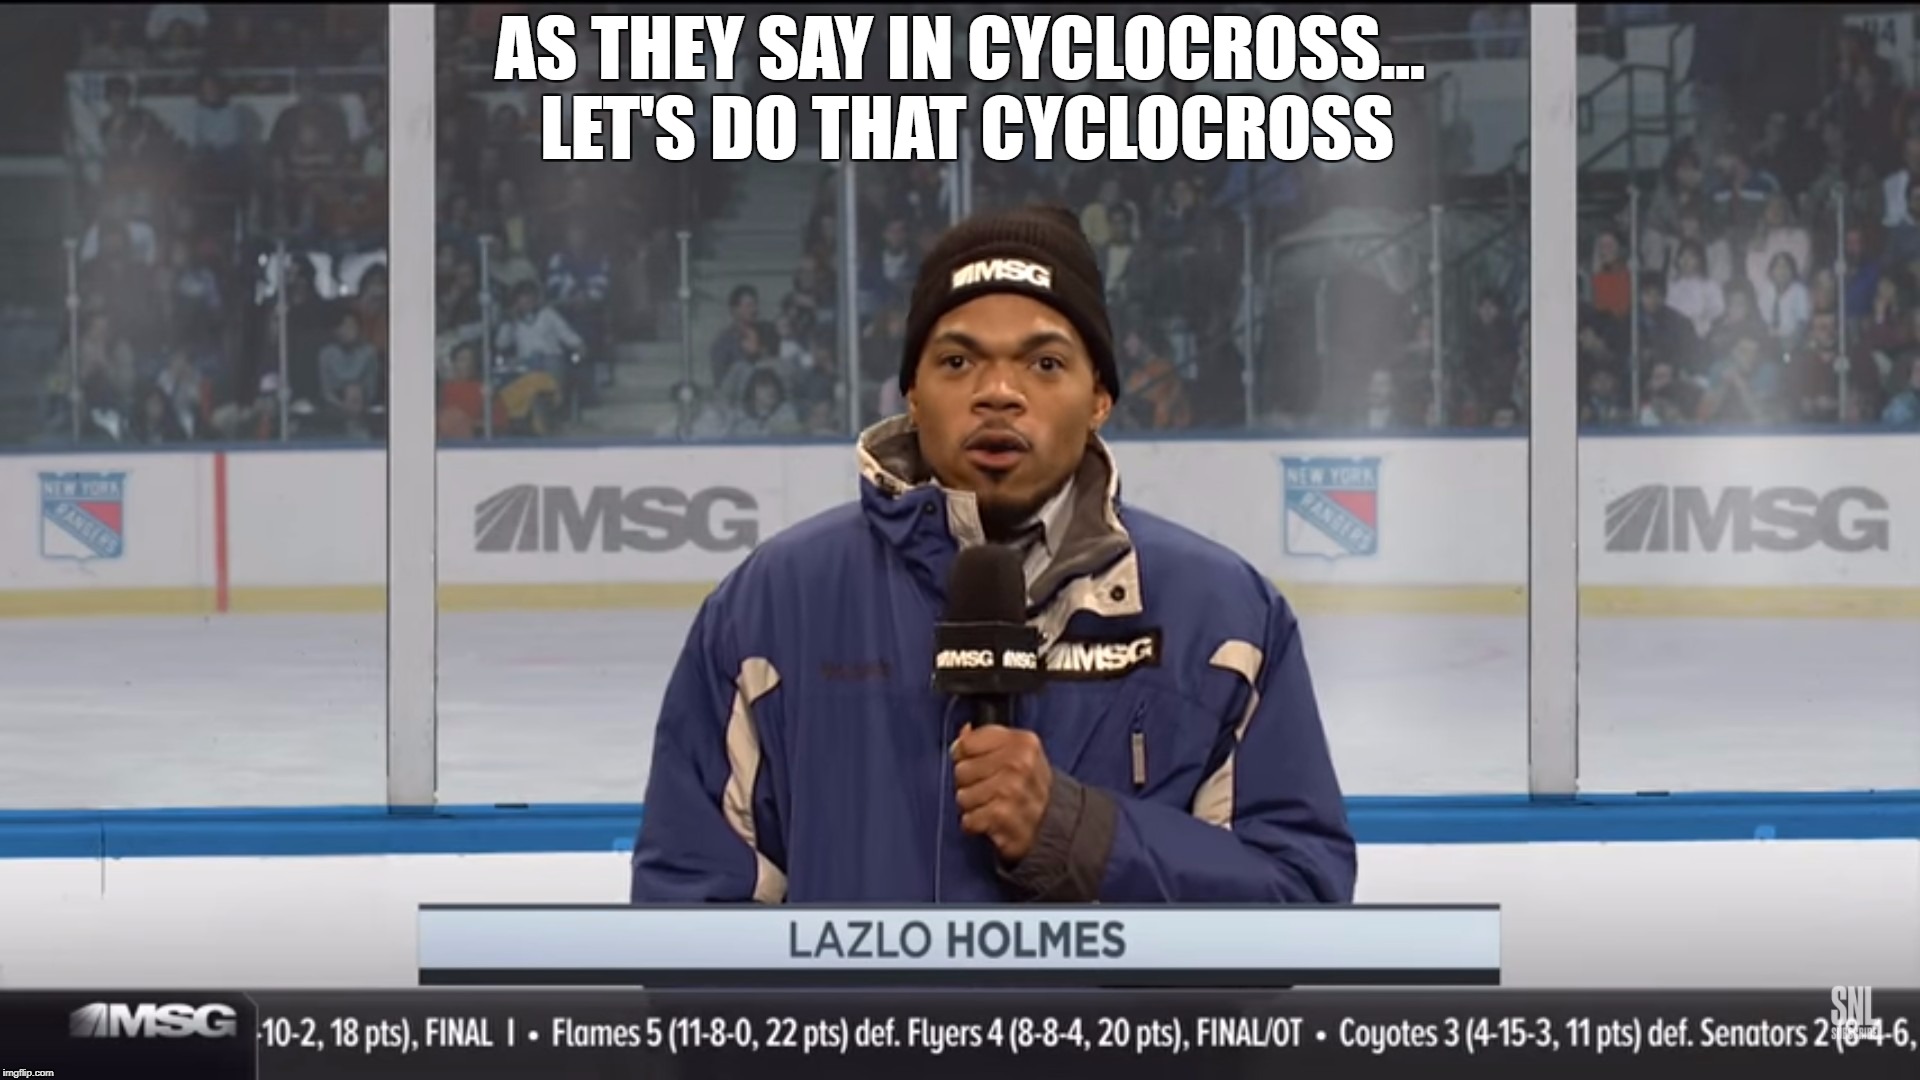 Let's do that cyclocross | AS THEY SAY IN CYCLOCROSS... LET'S DO THAT CYCLOCROSS | image tagged in cyclocross,hockey,chance the rapper,snl,let's do that hockey | made w/ Imgflip meme maker